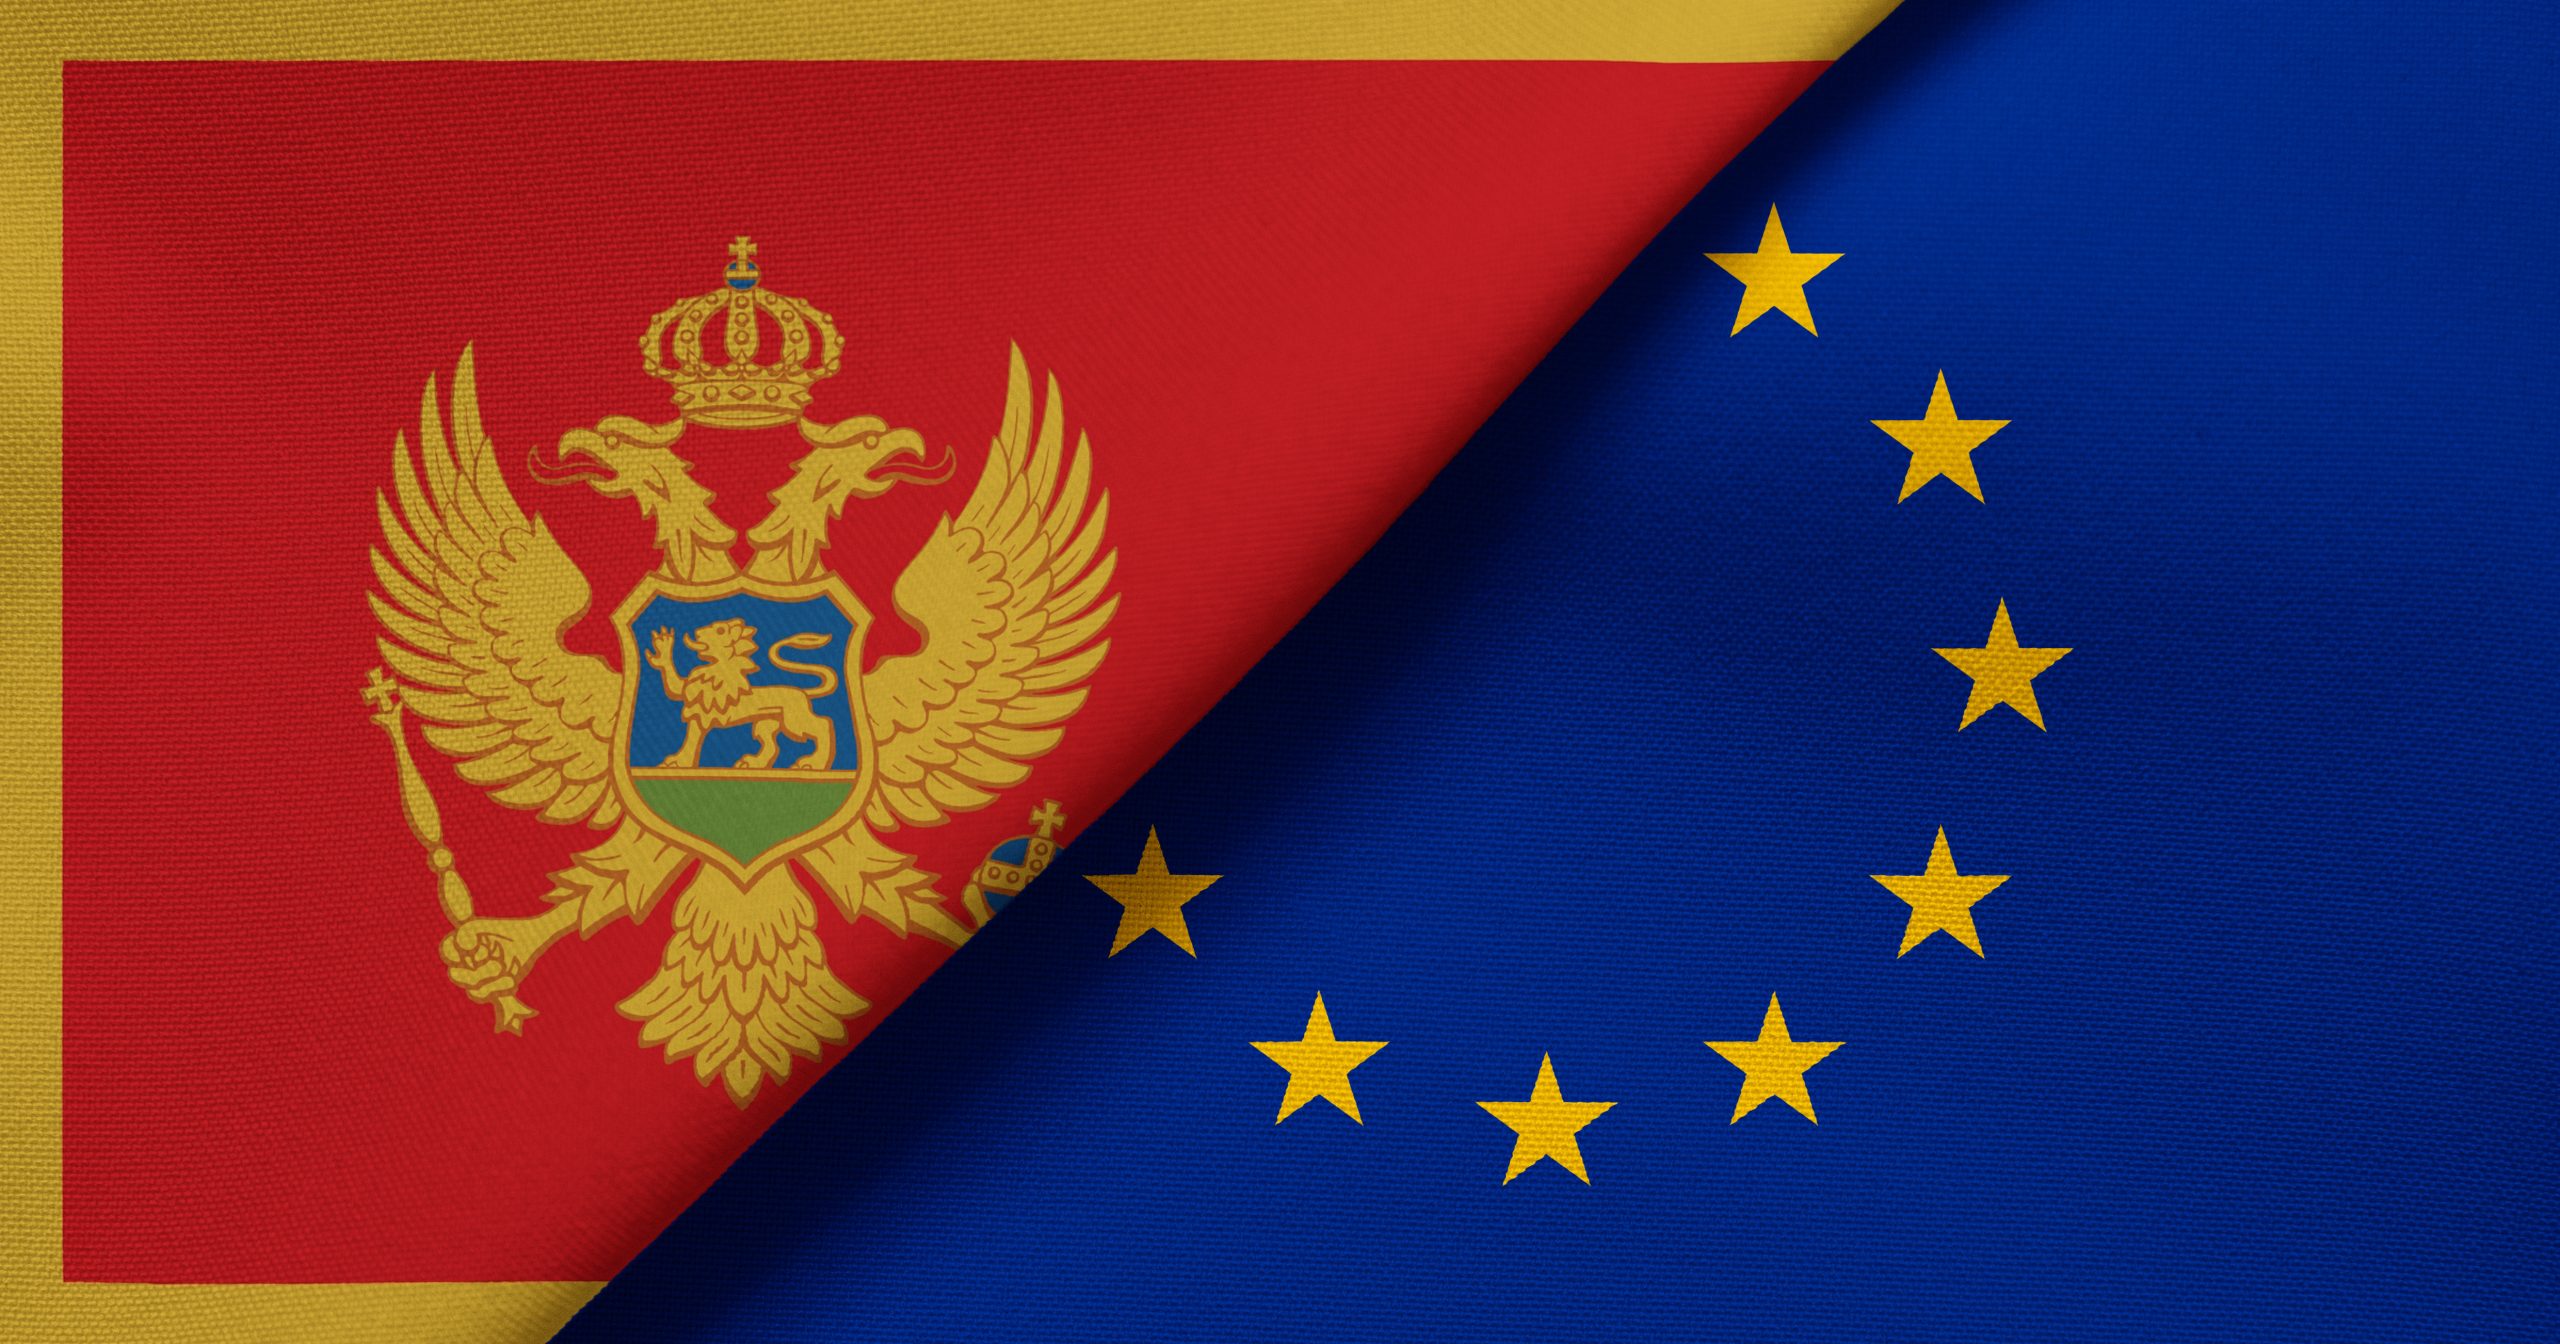 Language Requirements for Devices in Montenegro